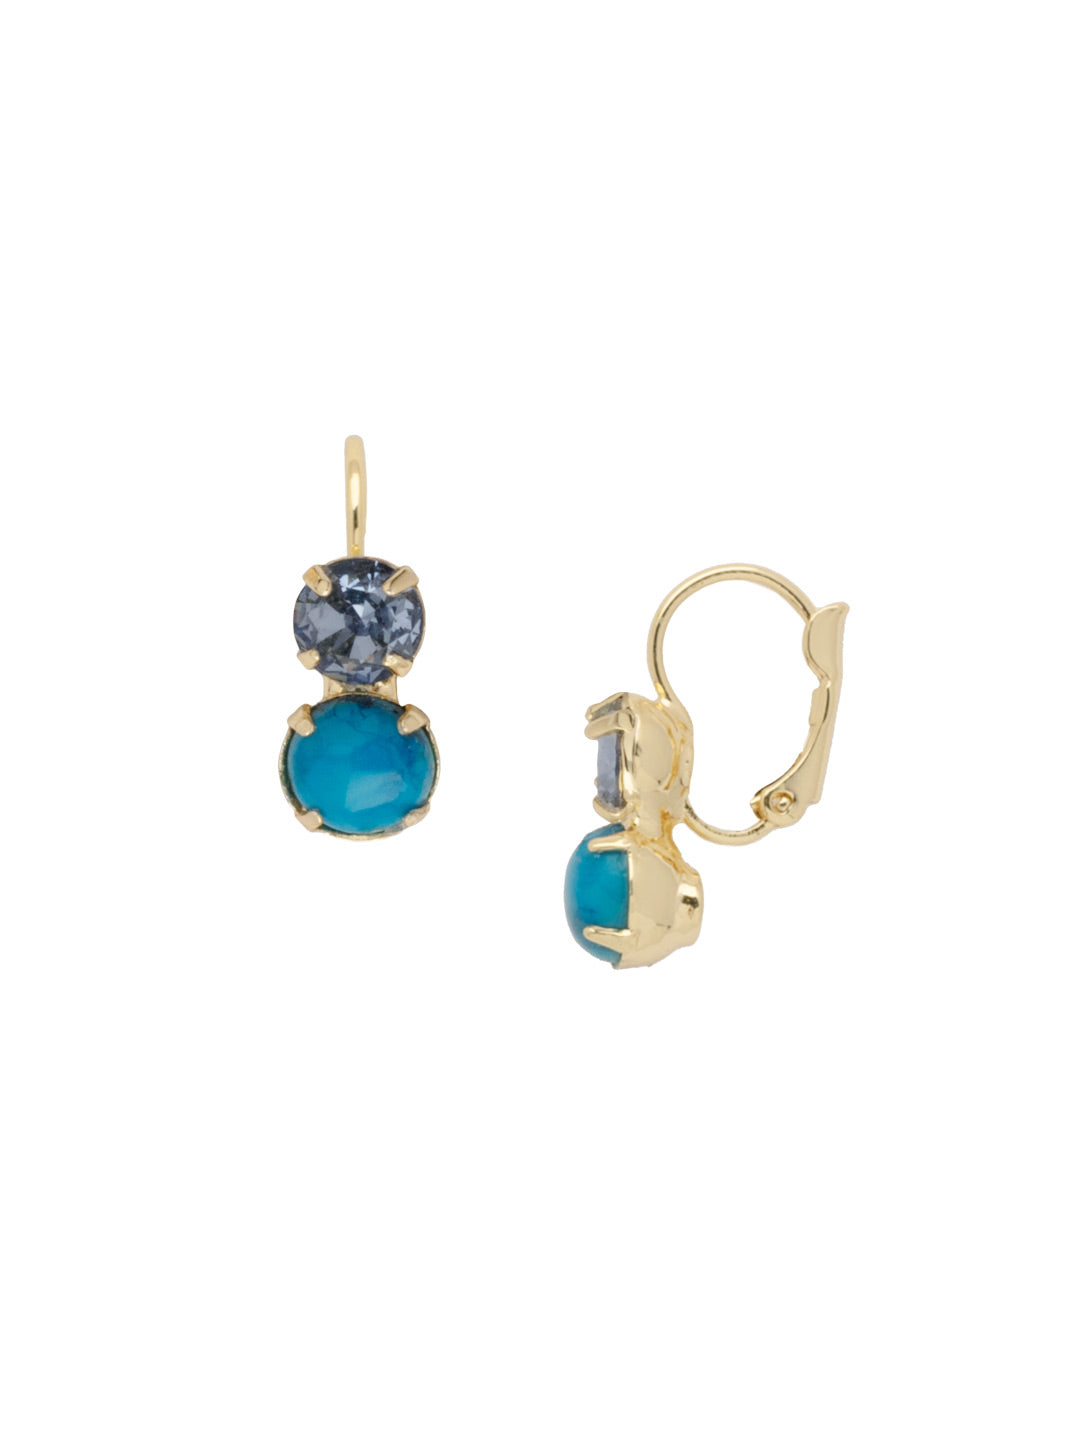 Xena Classic Dangle Earrings - EFF11BGHBR - <p>The Xena Classic Dangle Earrings feature two small round cut crystals and semi-precious stones dangling from a lever back French wire. From Sorrelli's Happy Birthday Redux collection in our Bright Gold-tone finish.</p>